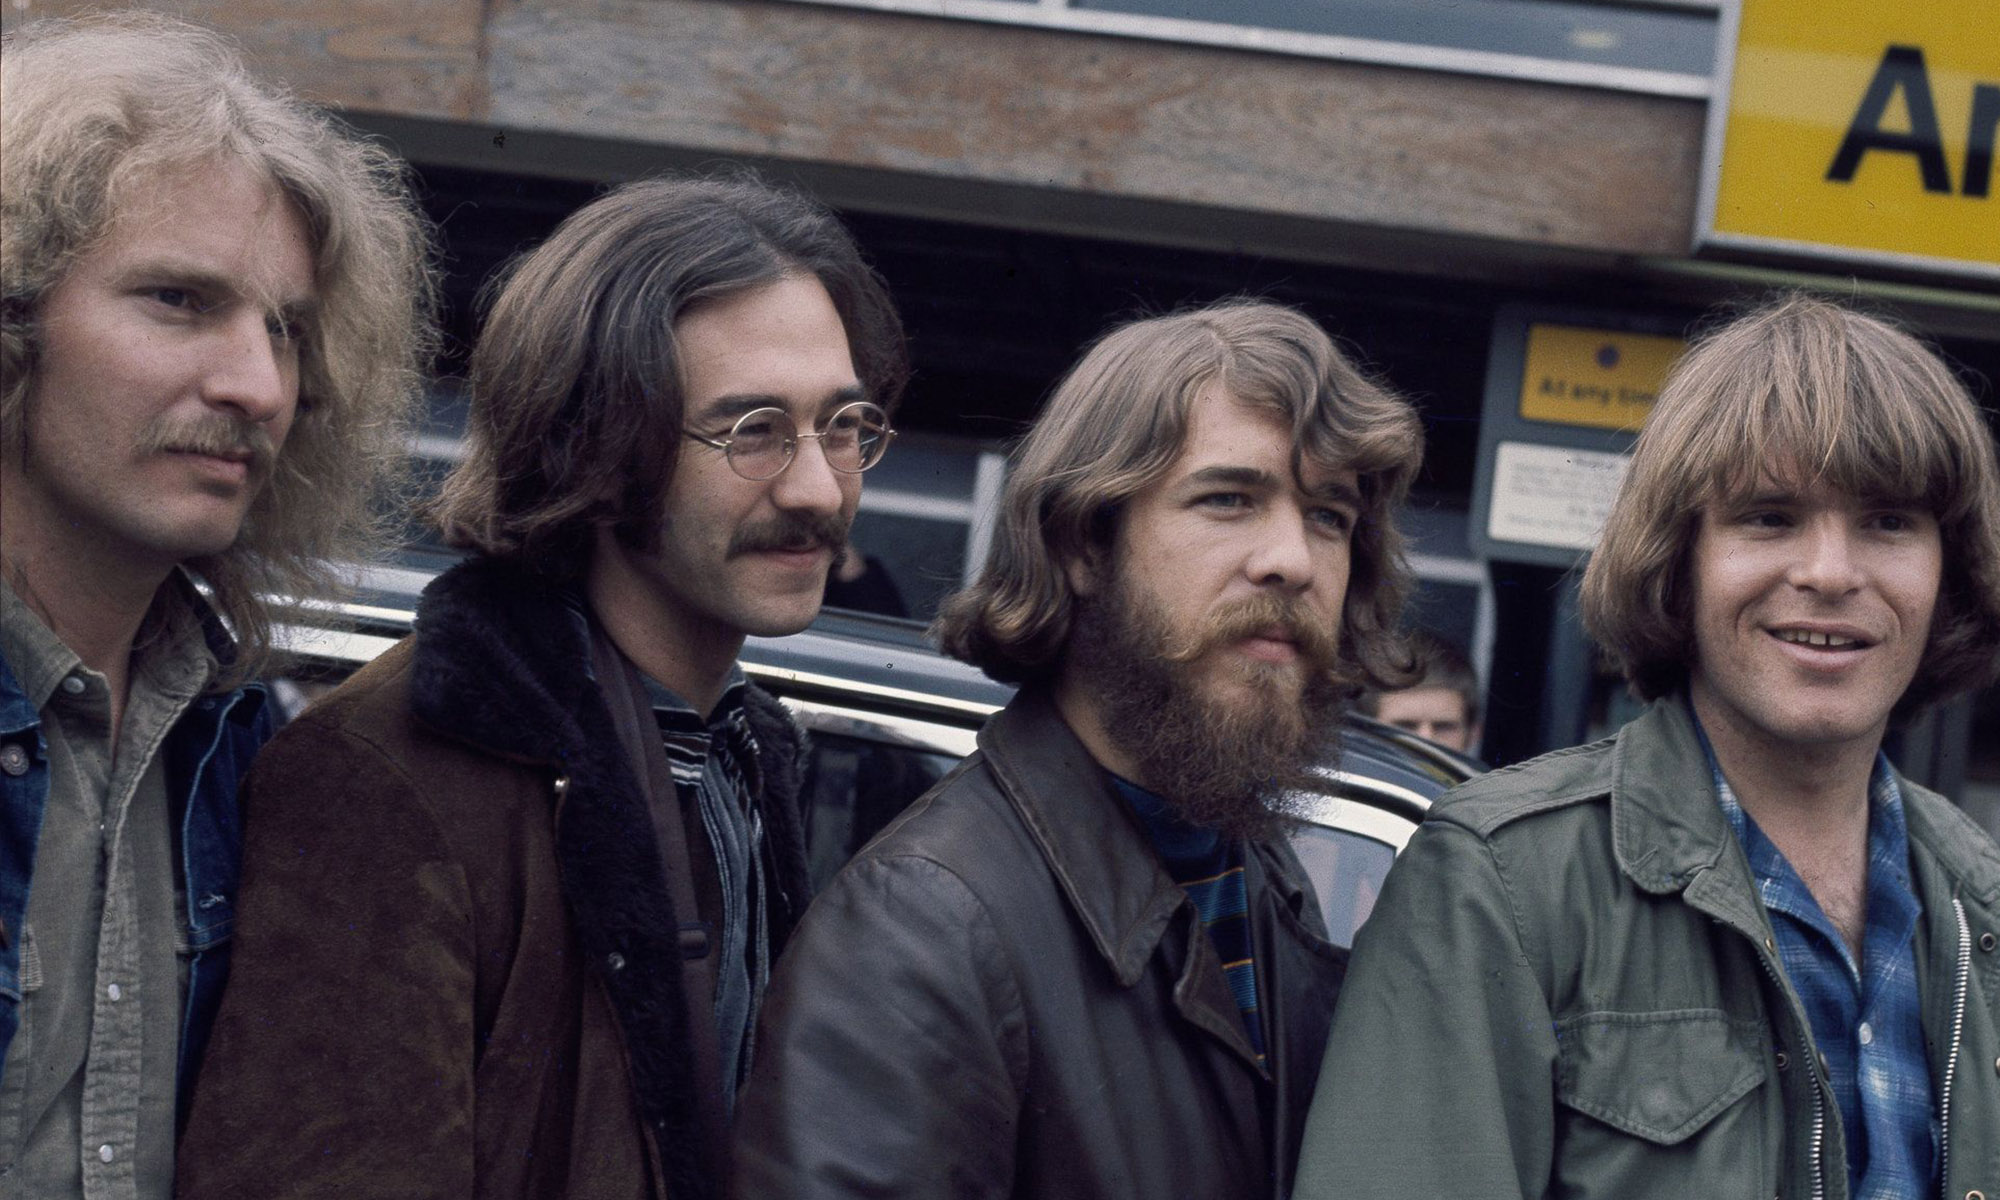 "Creedence Clearwater Revival"